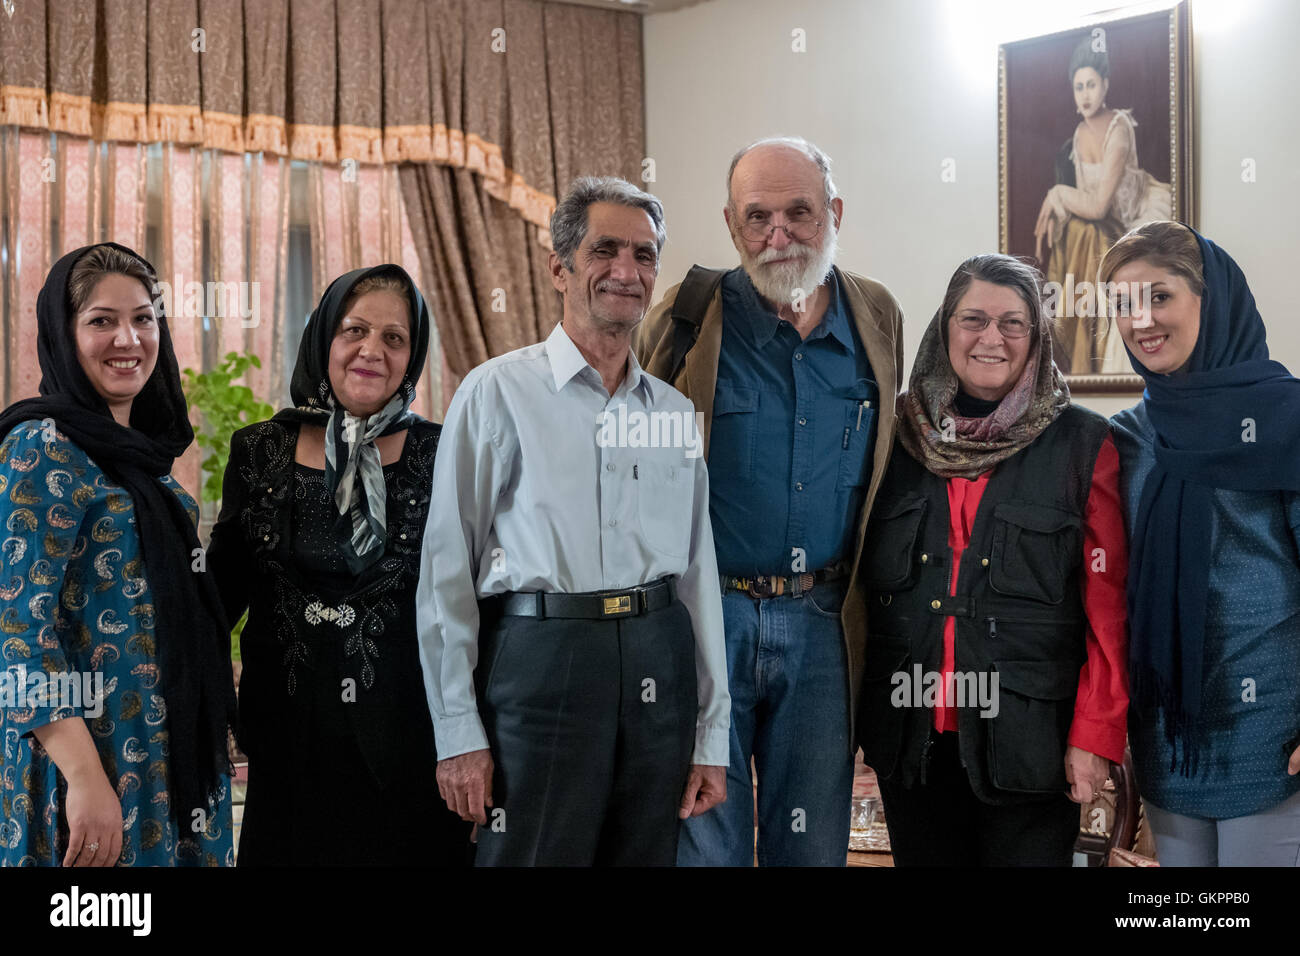 Narsrin Bateni is an award winning miniaturist specializing in traditional Persian miniature paintings in her workshop in Isfahan, Iran.  Narsrin with her family and customers in her home. Stock Photo